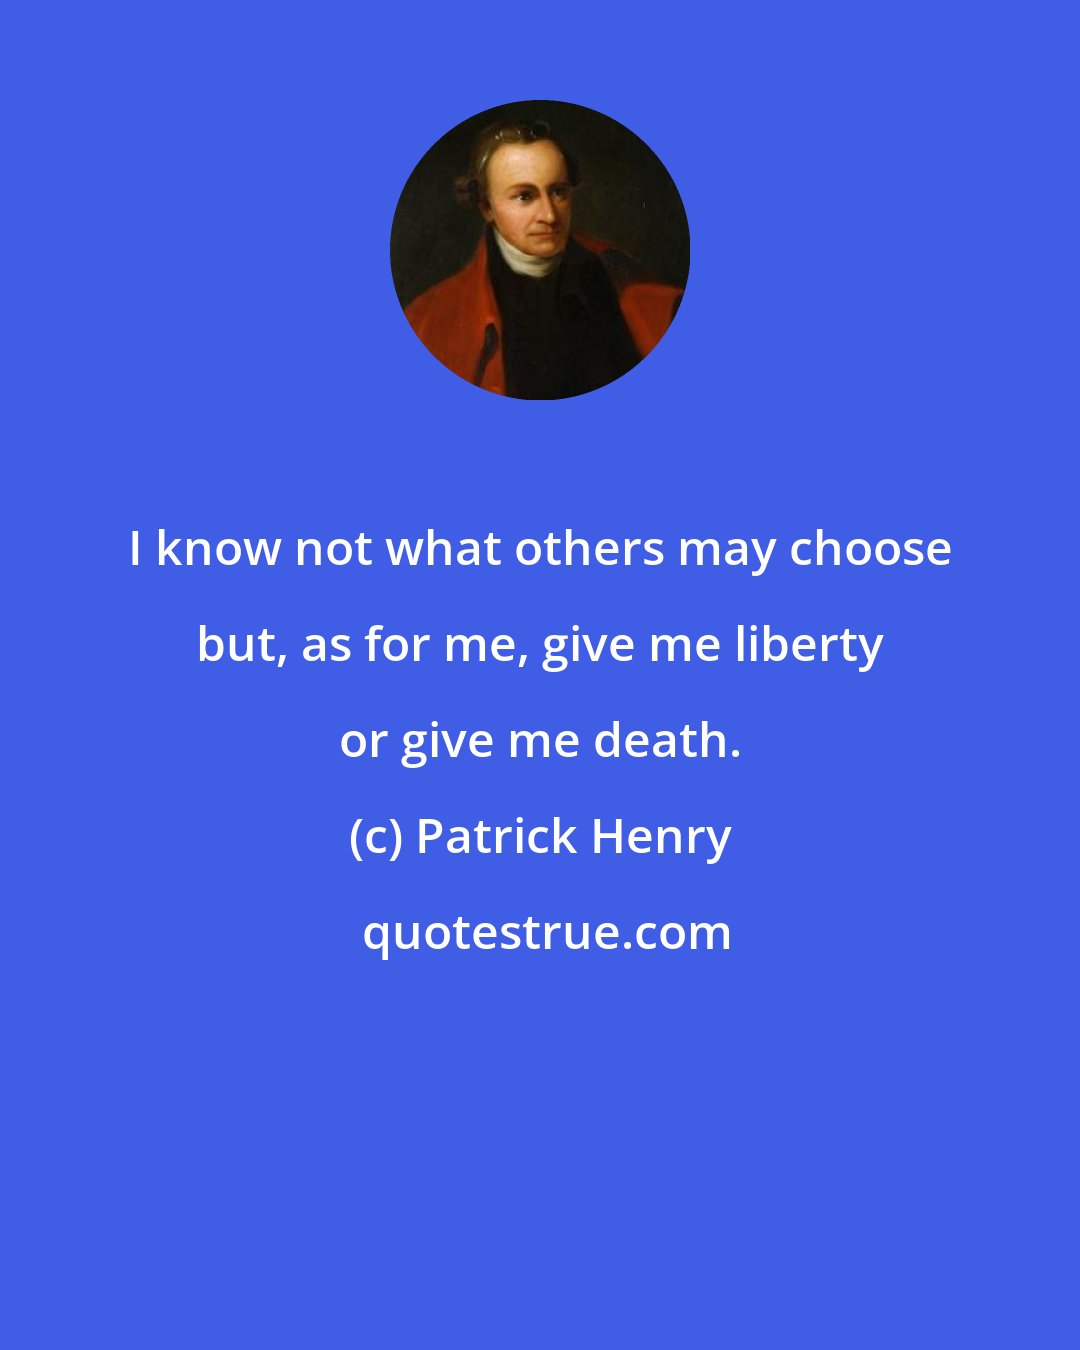 Patrick Henry: I know not what others may choose but, as for me, give me liberty or give me death.